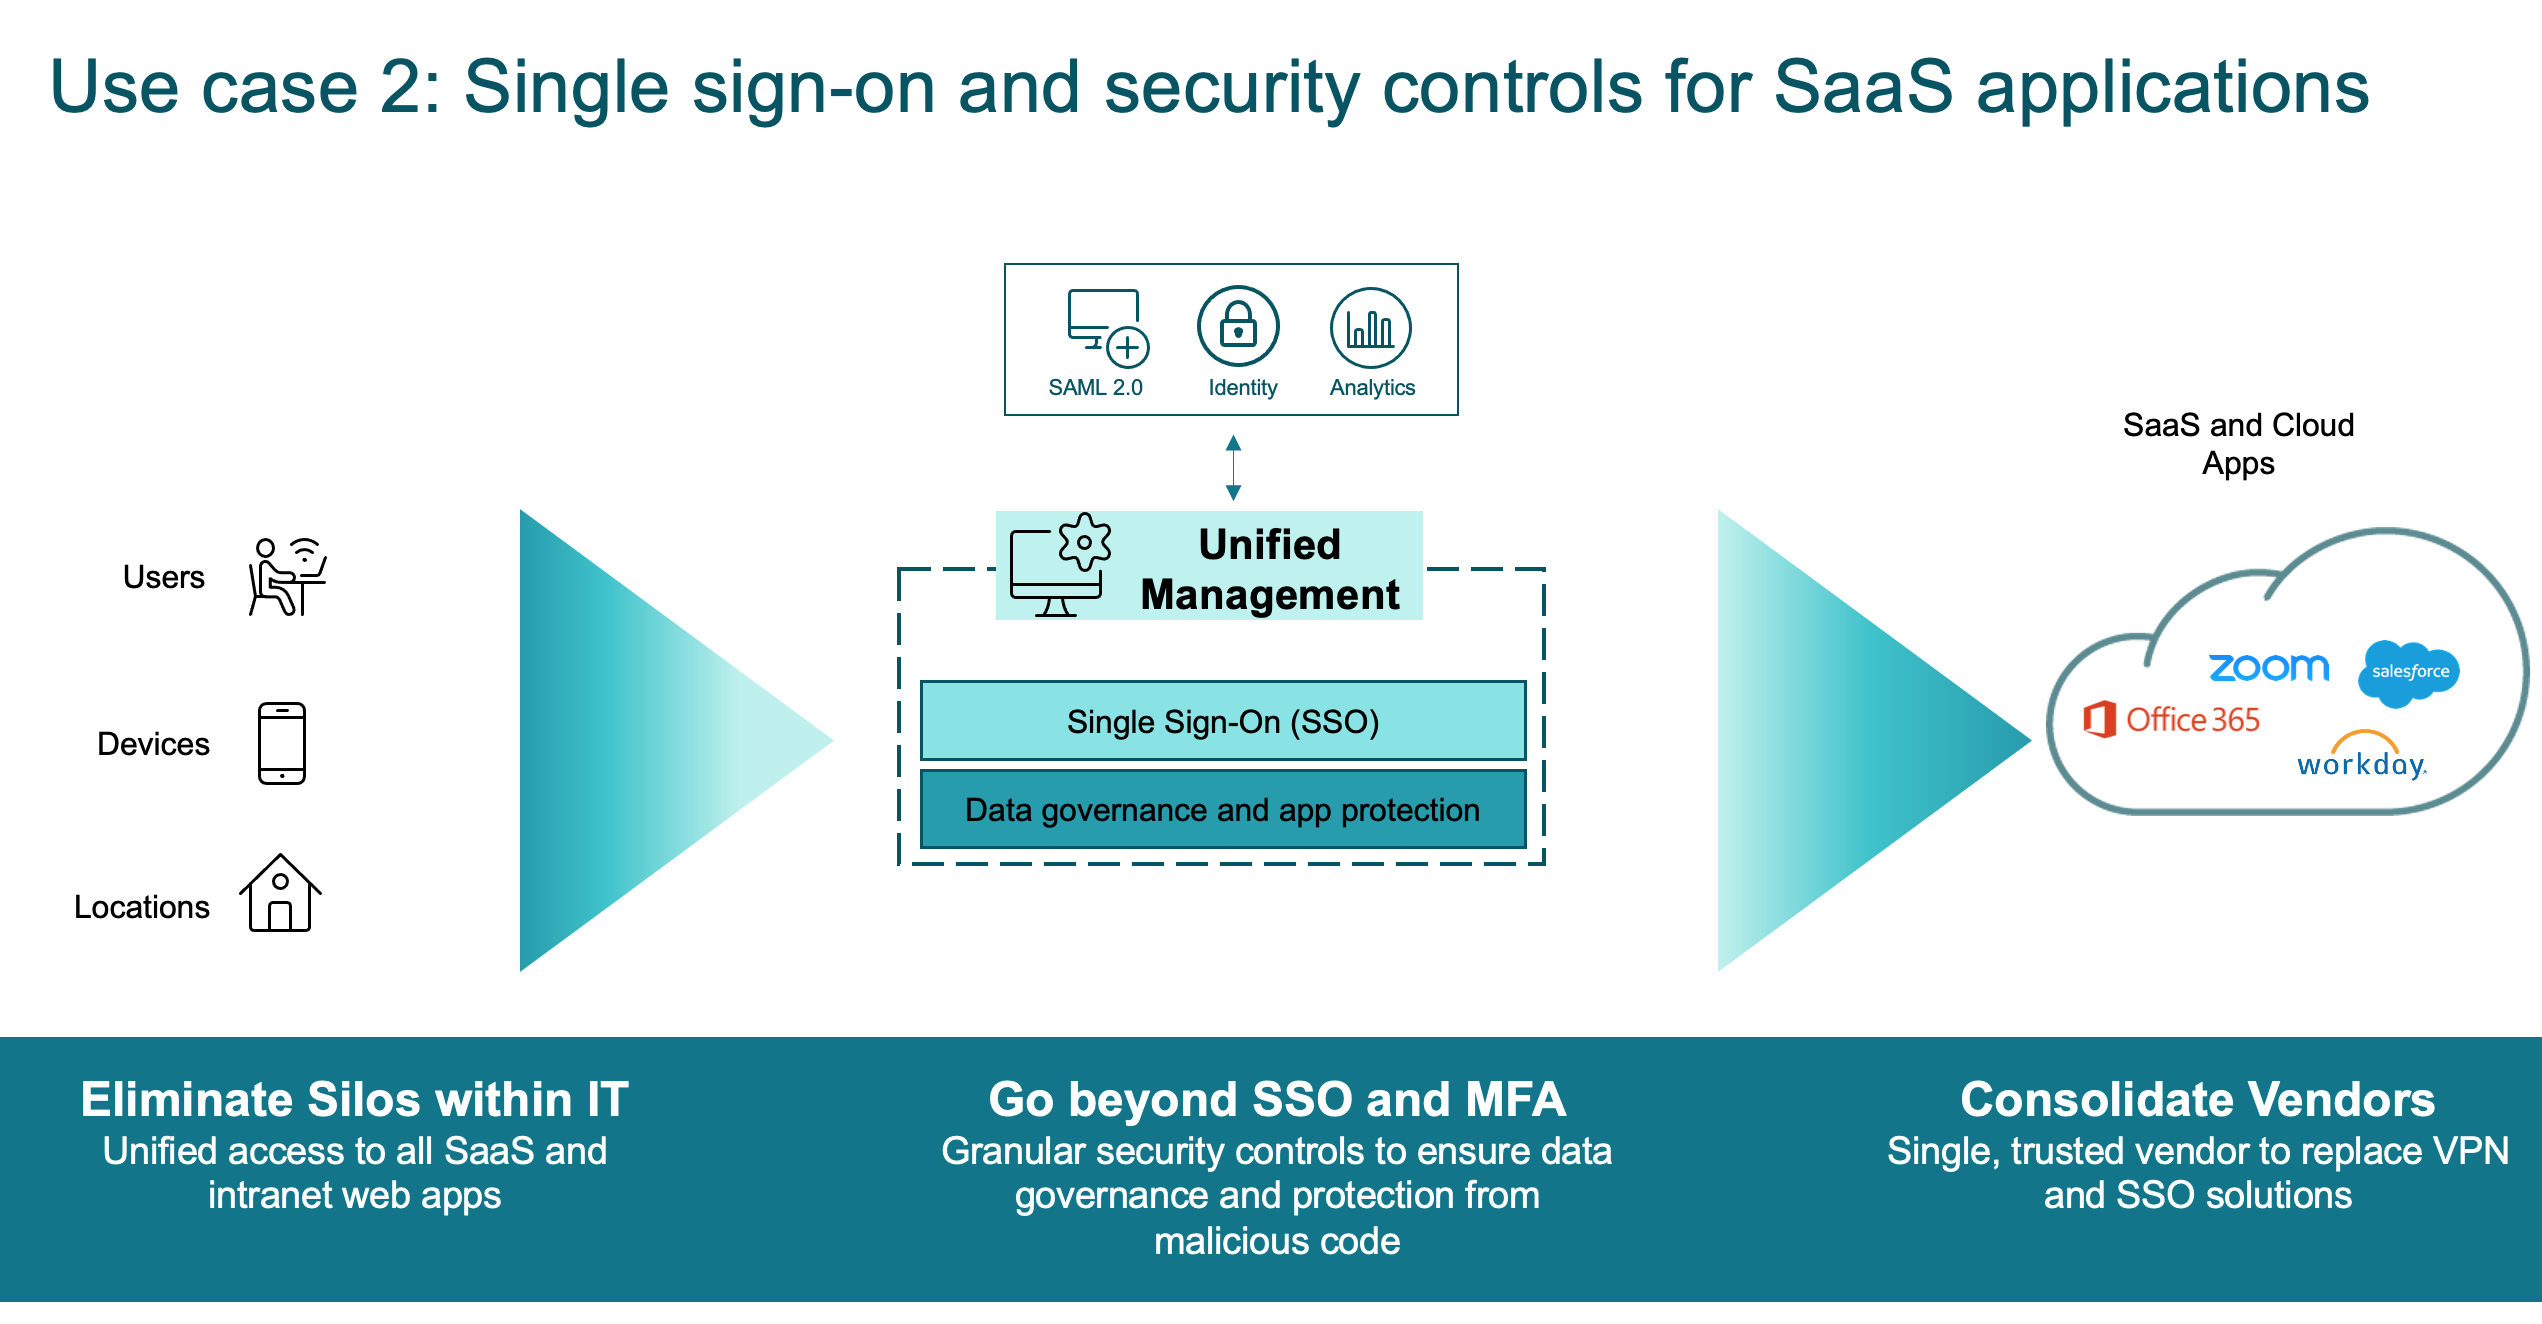 SSO and Security Controls for SaaS Apps